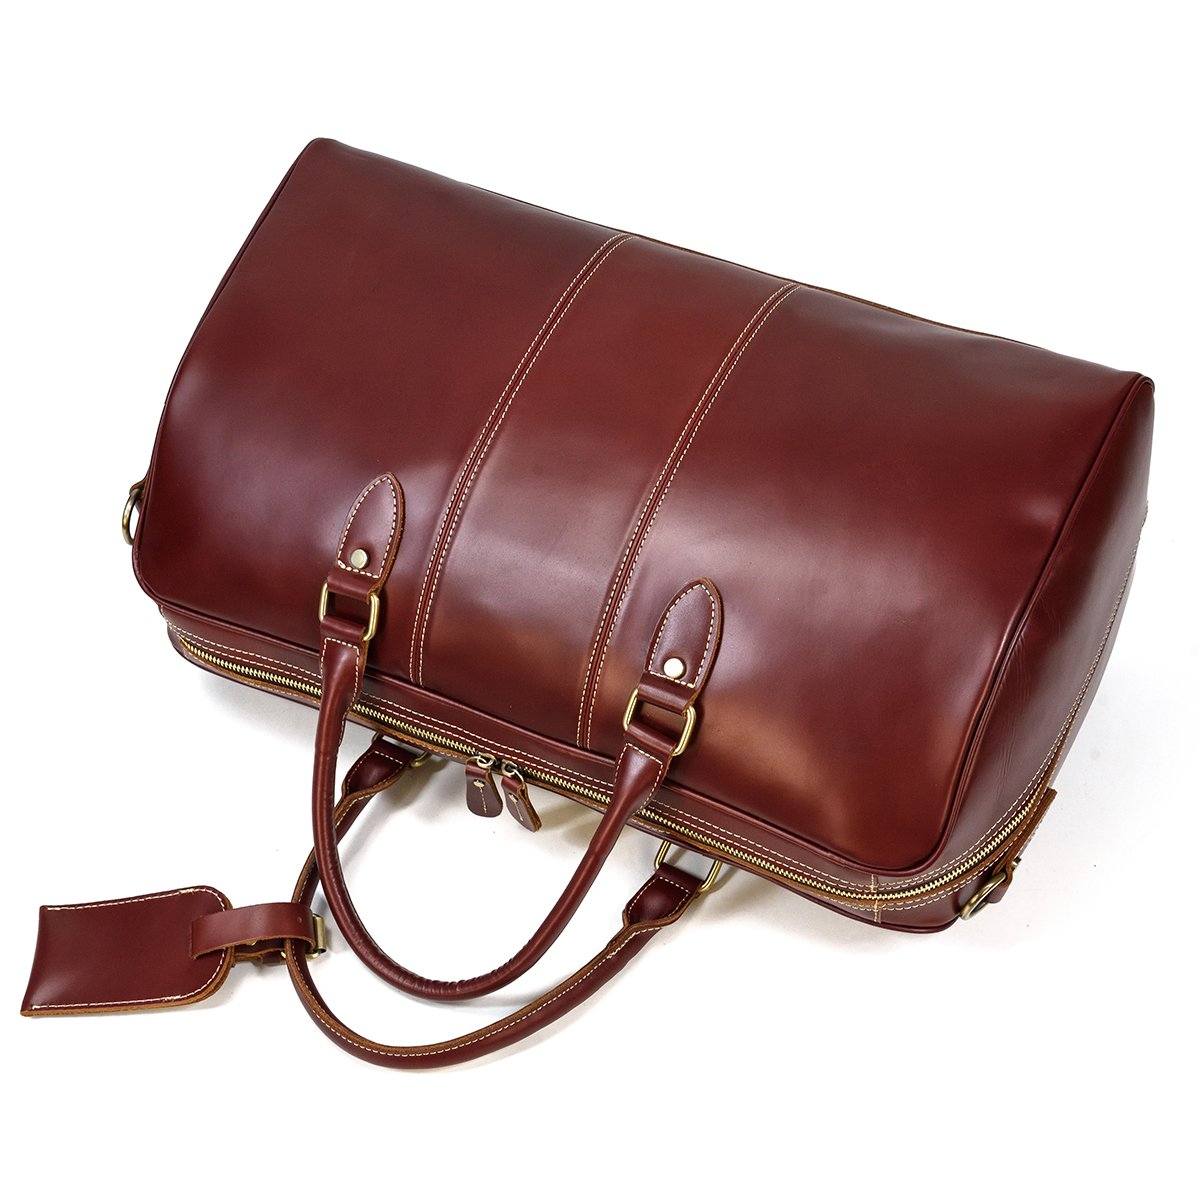 Leather Duffle Bags - Leather Weekender & Overnight Bags – Eiken Shop